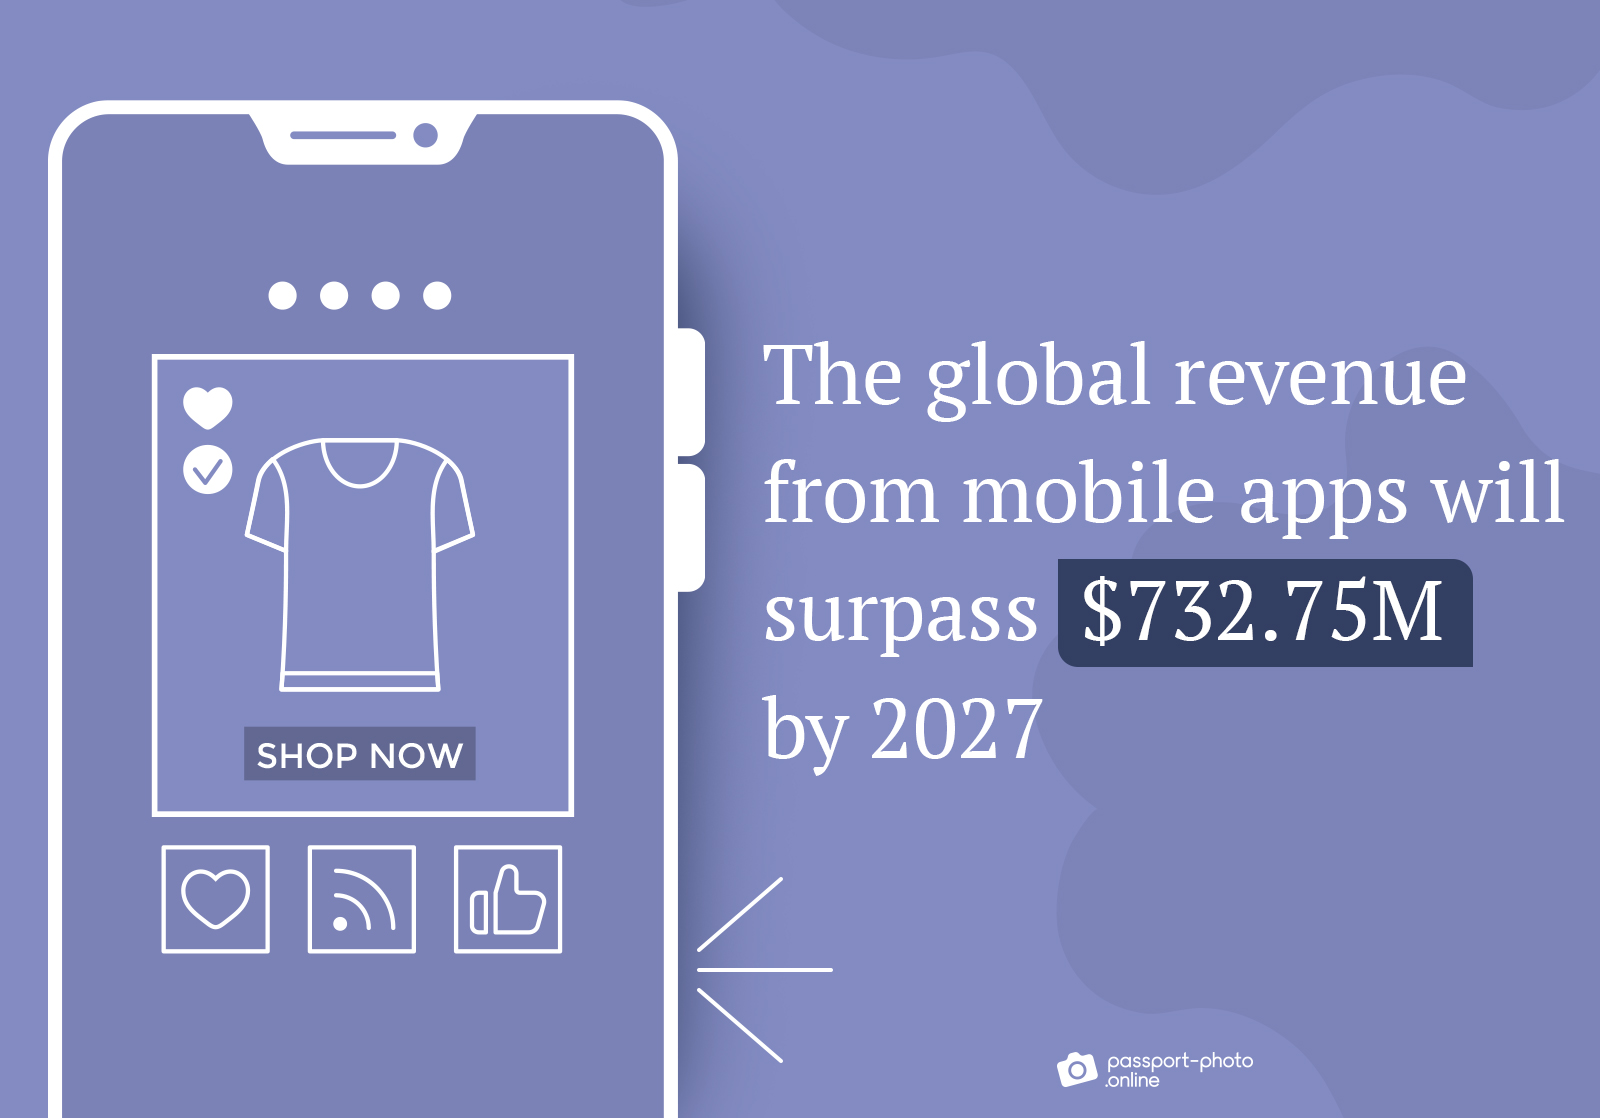 Global mobile app revenue will jump to over $732.75M by 2027